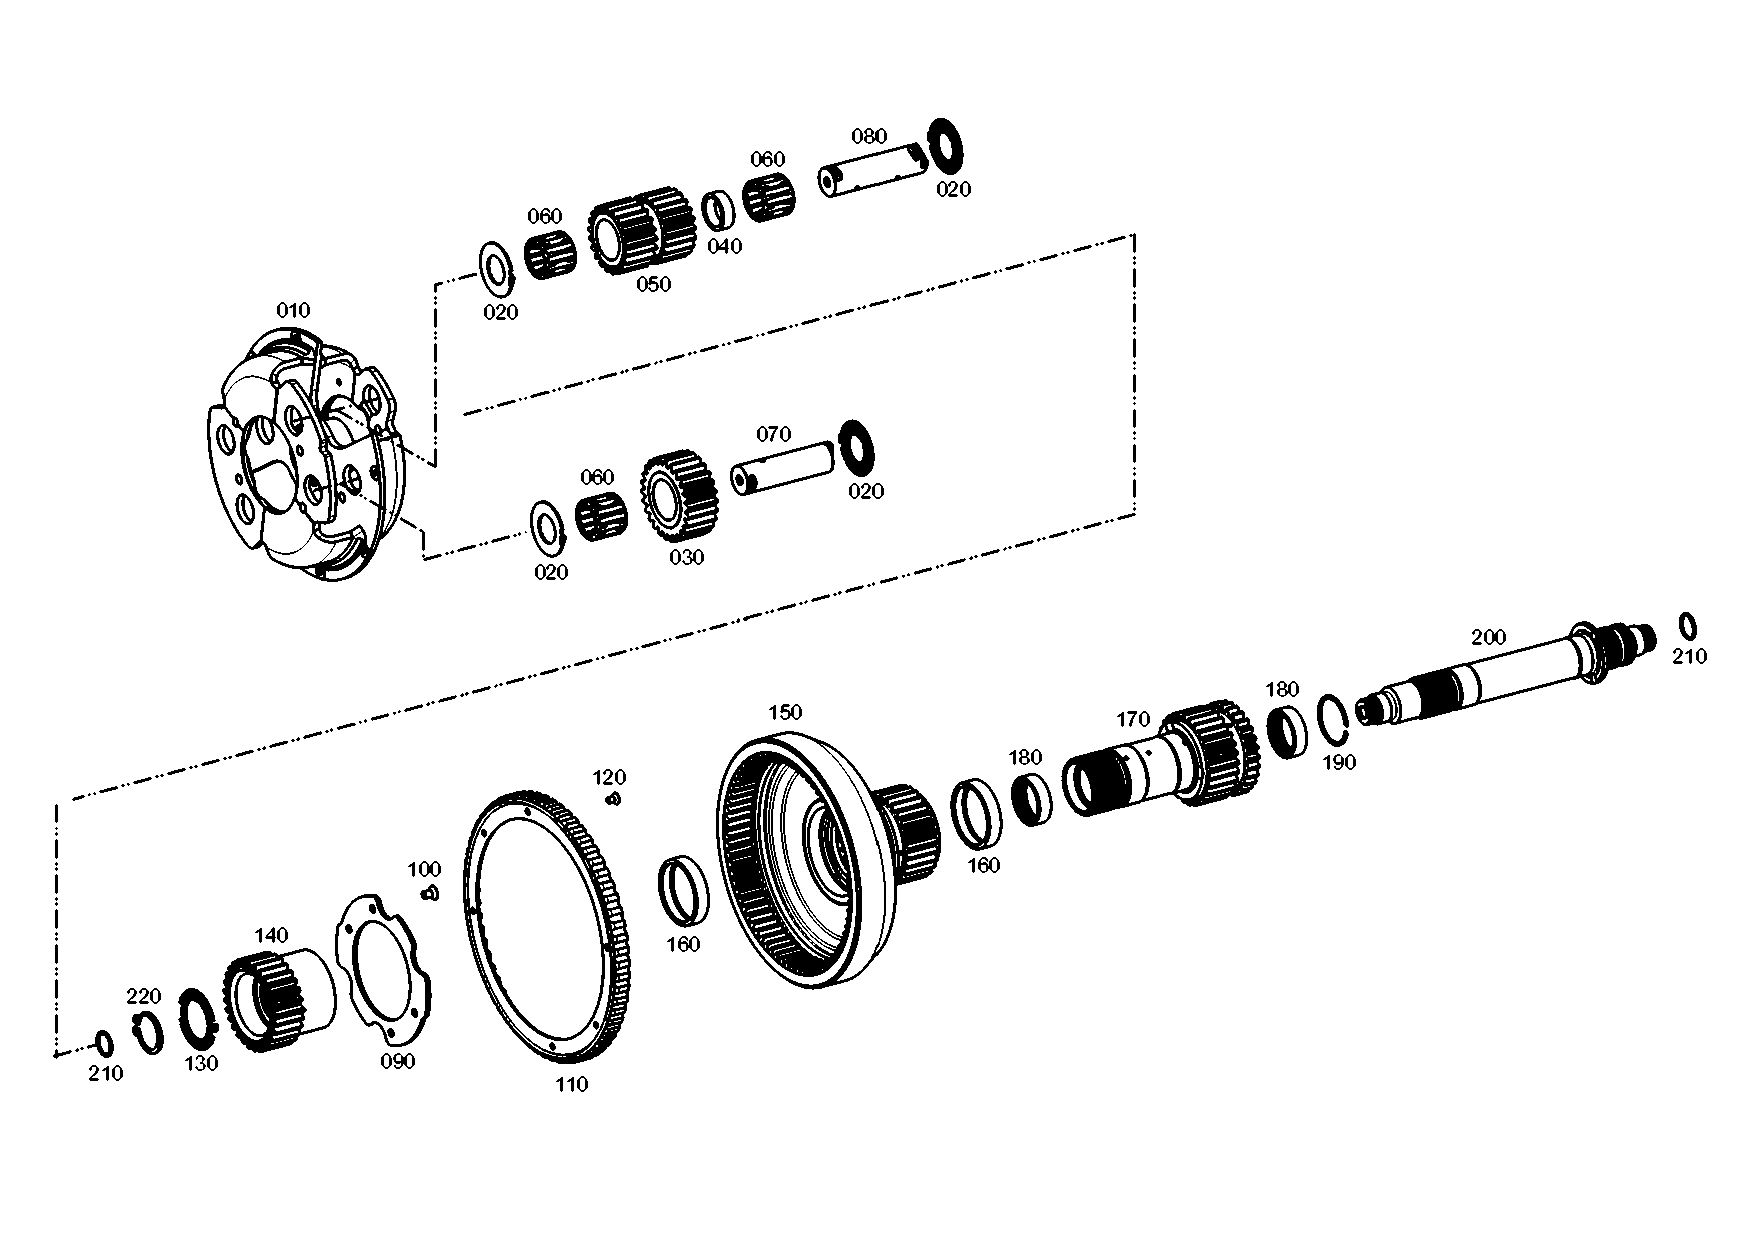 drawing for E. N. M. T. P. / CPG 192300220052 - PRESSURE DISK (figure 1)